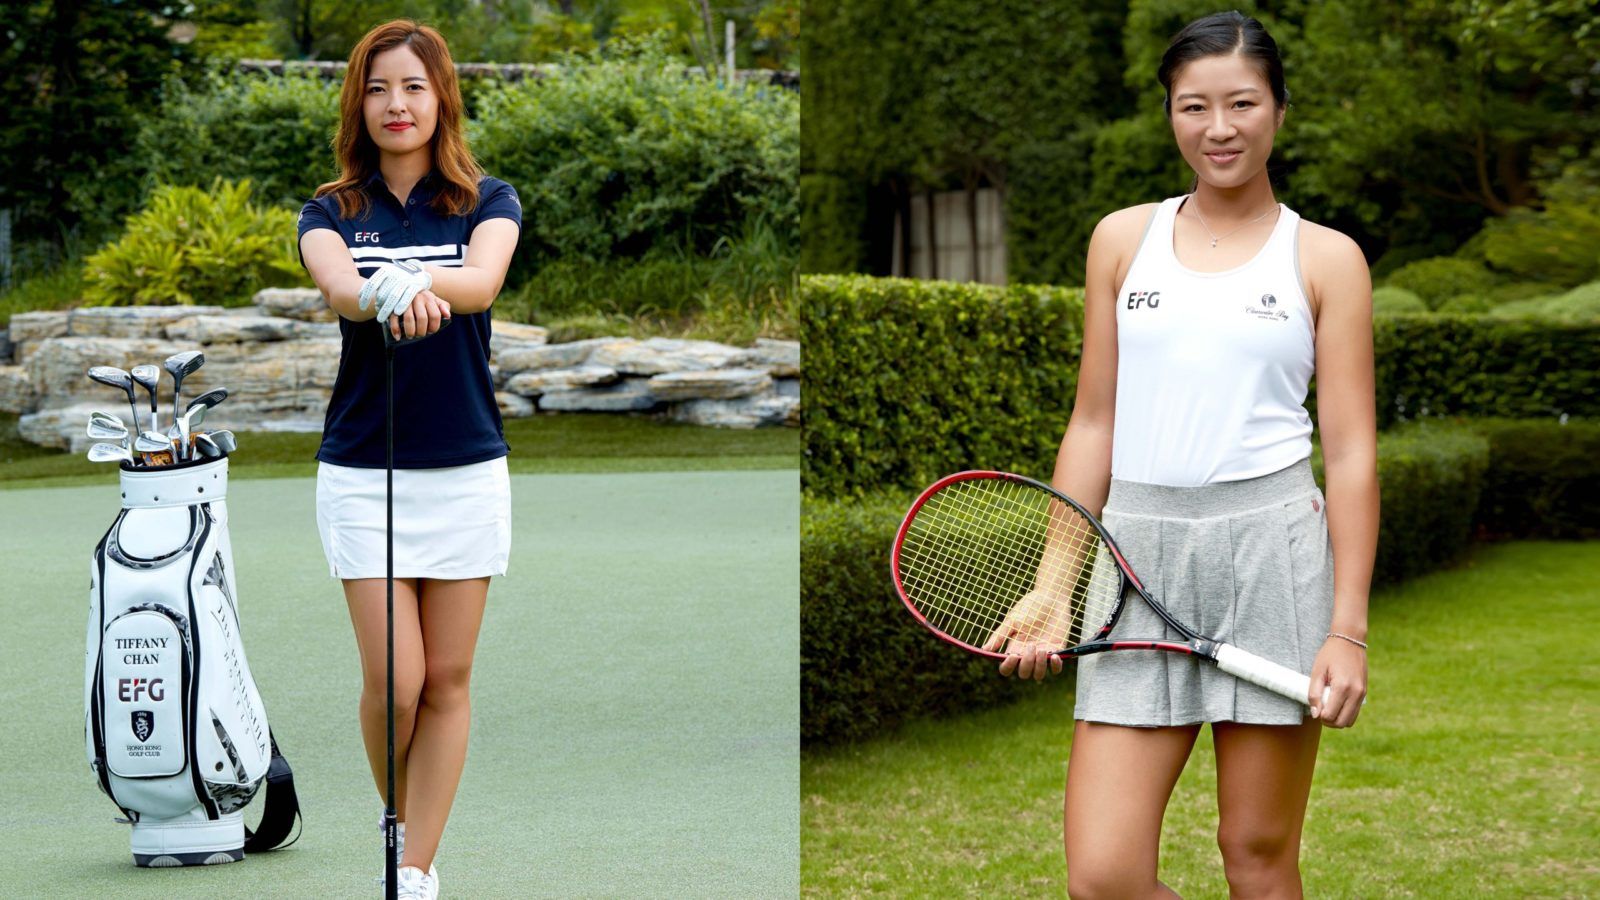 Golfer Tiffany Chan and Tennis Player Eudice Chong Share About Taking on the World’s Best